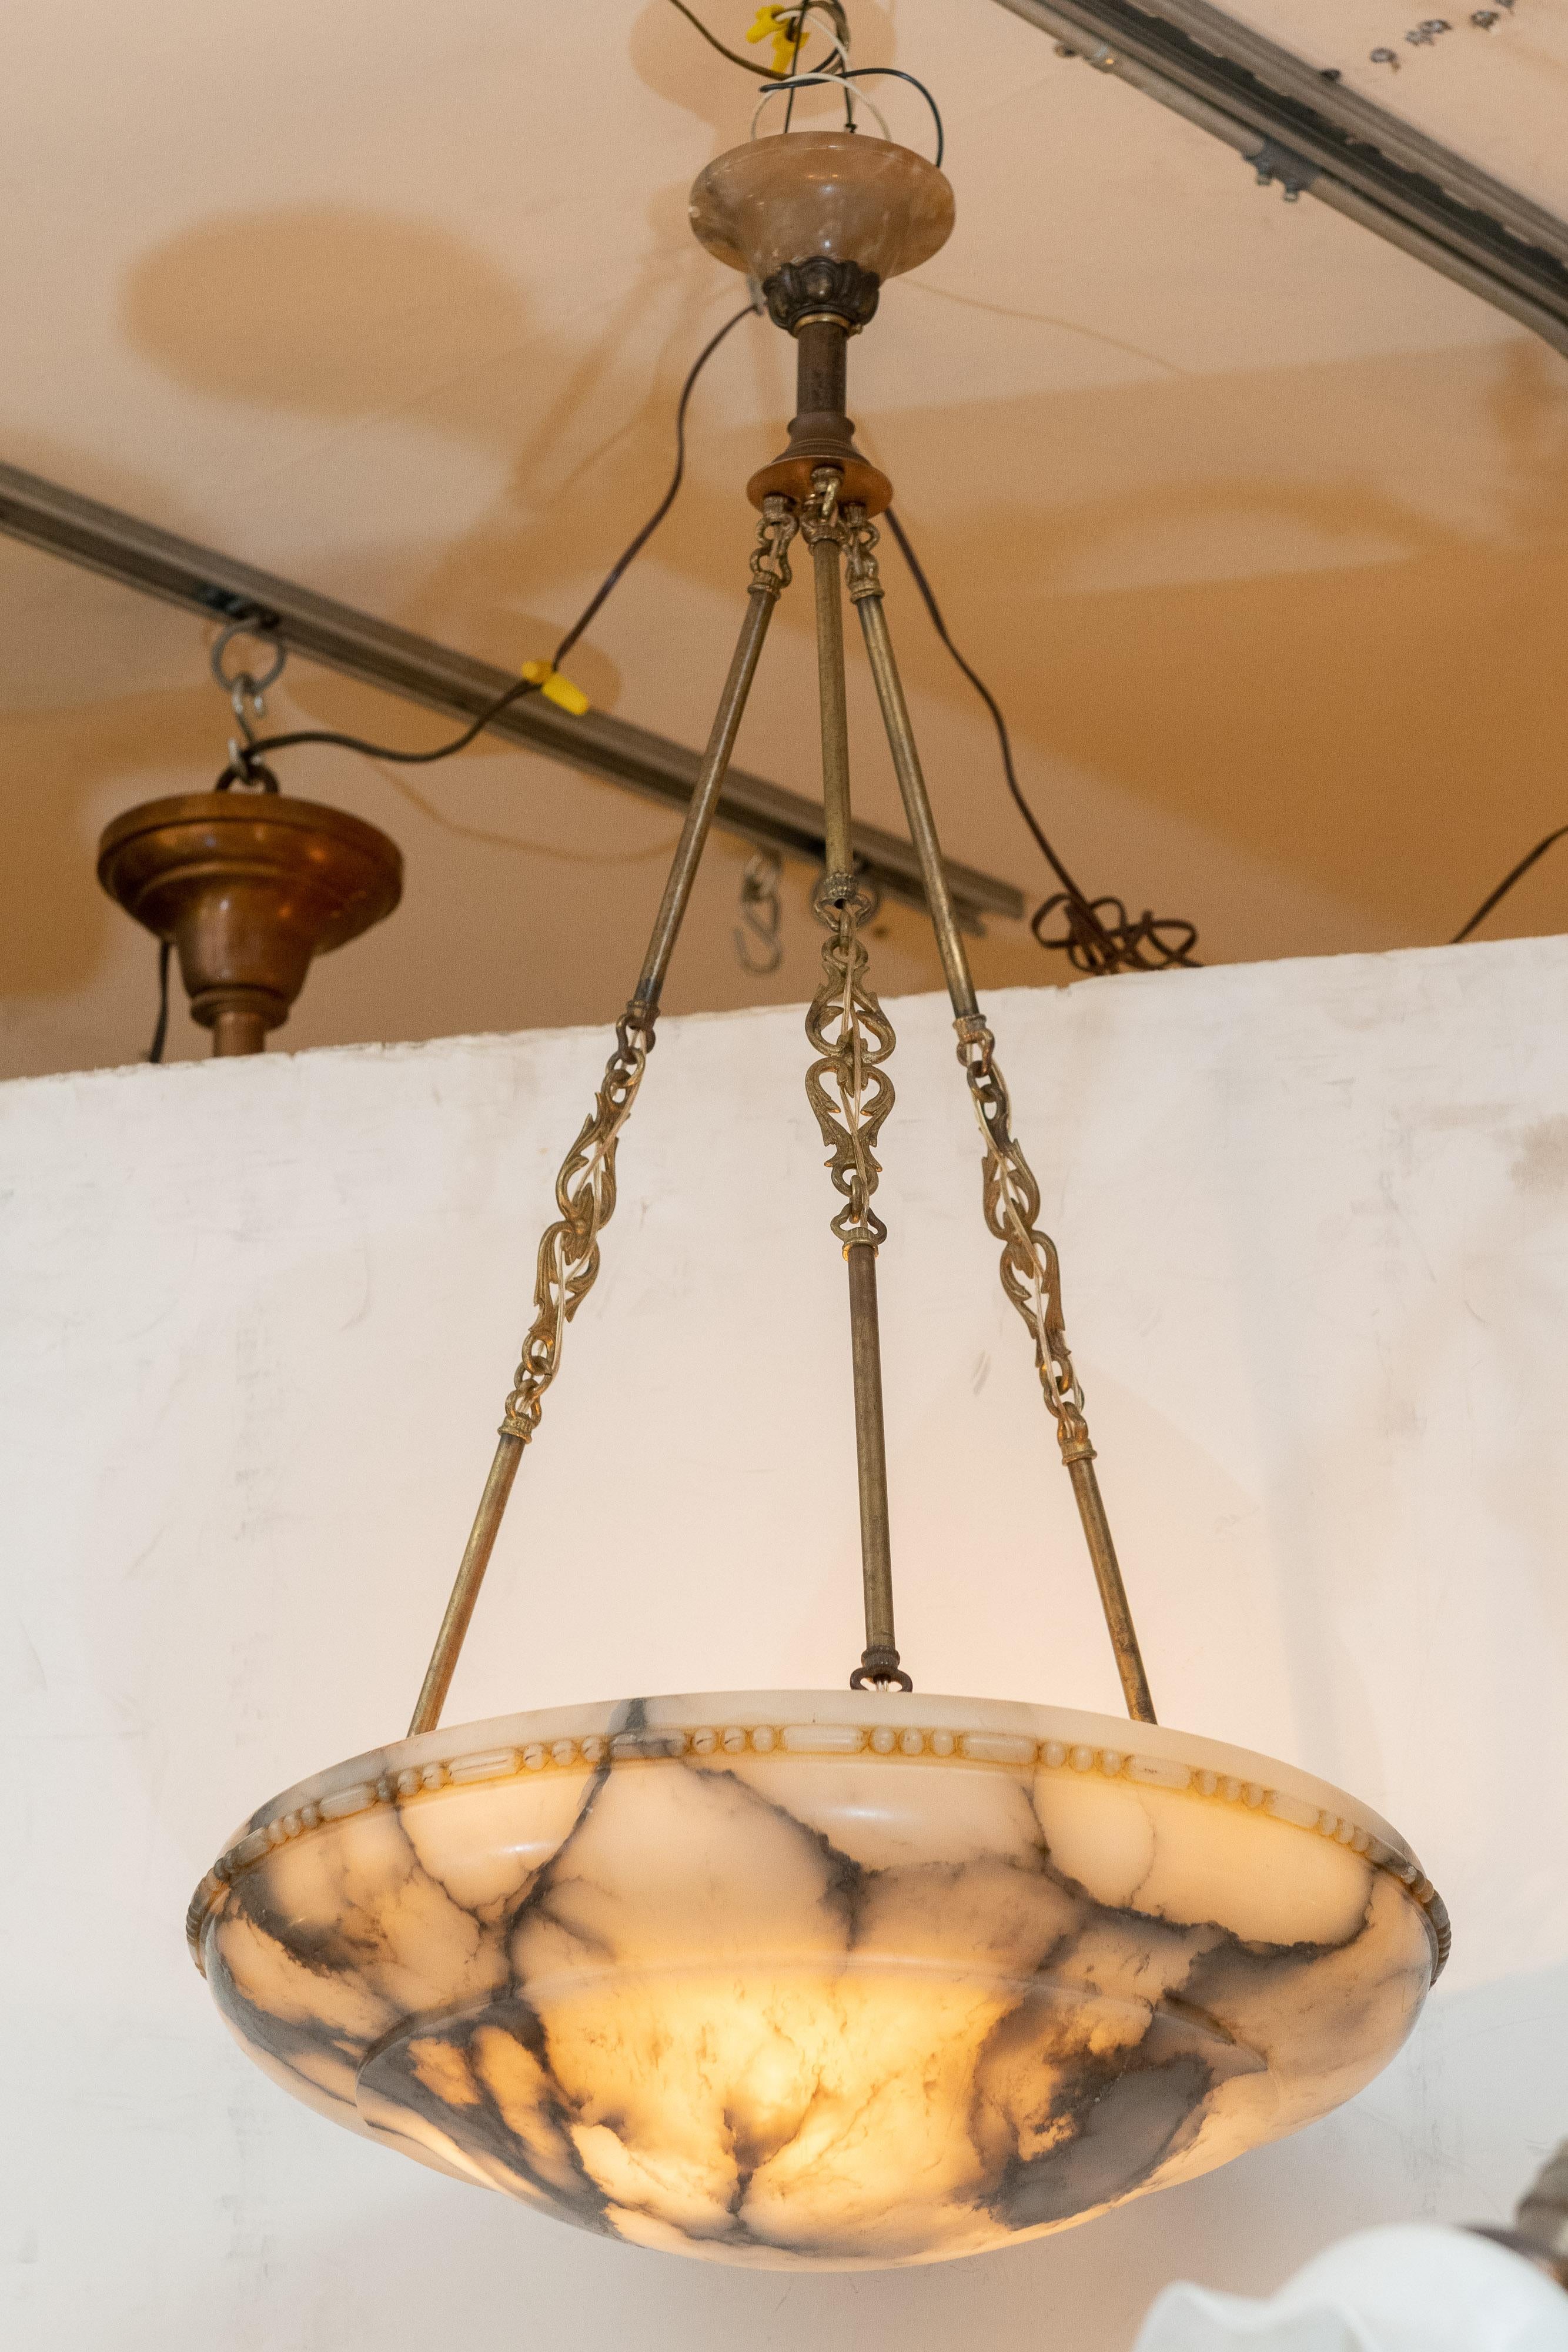 Whether you are doing Mid-Century Modern or antique lighting, this is a fabulous choice. Easily the best white alabaster chandelier we have ever offered. The white and black is eye catching, and then add on the original hardware to include the